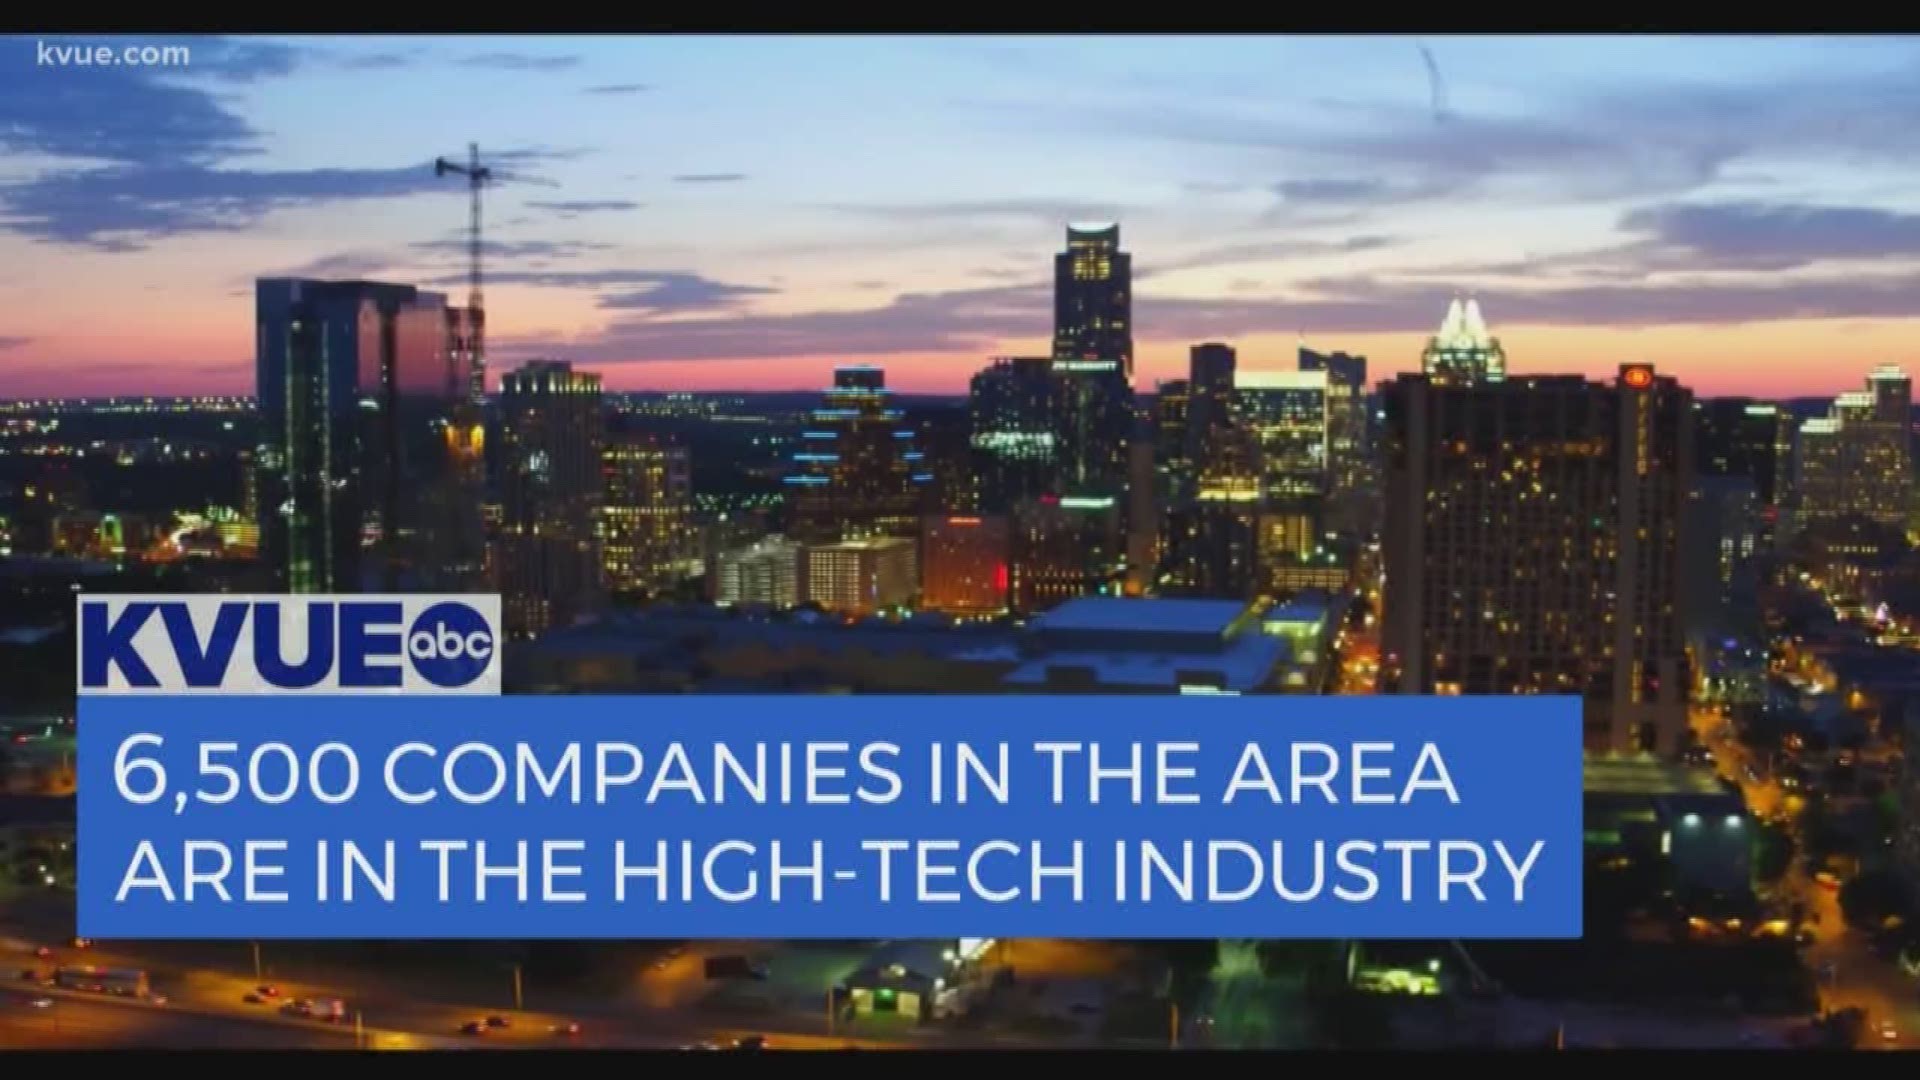 When it comes to high-tech growth in the Austin area, the numbers tell the story.